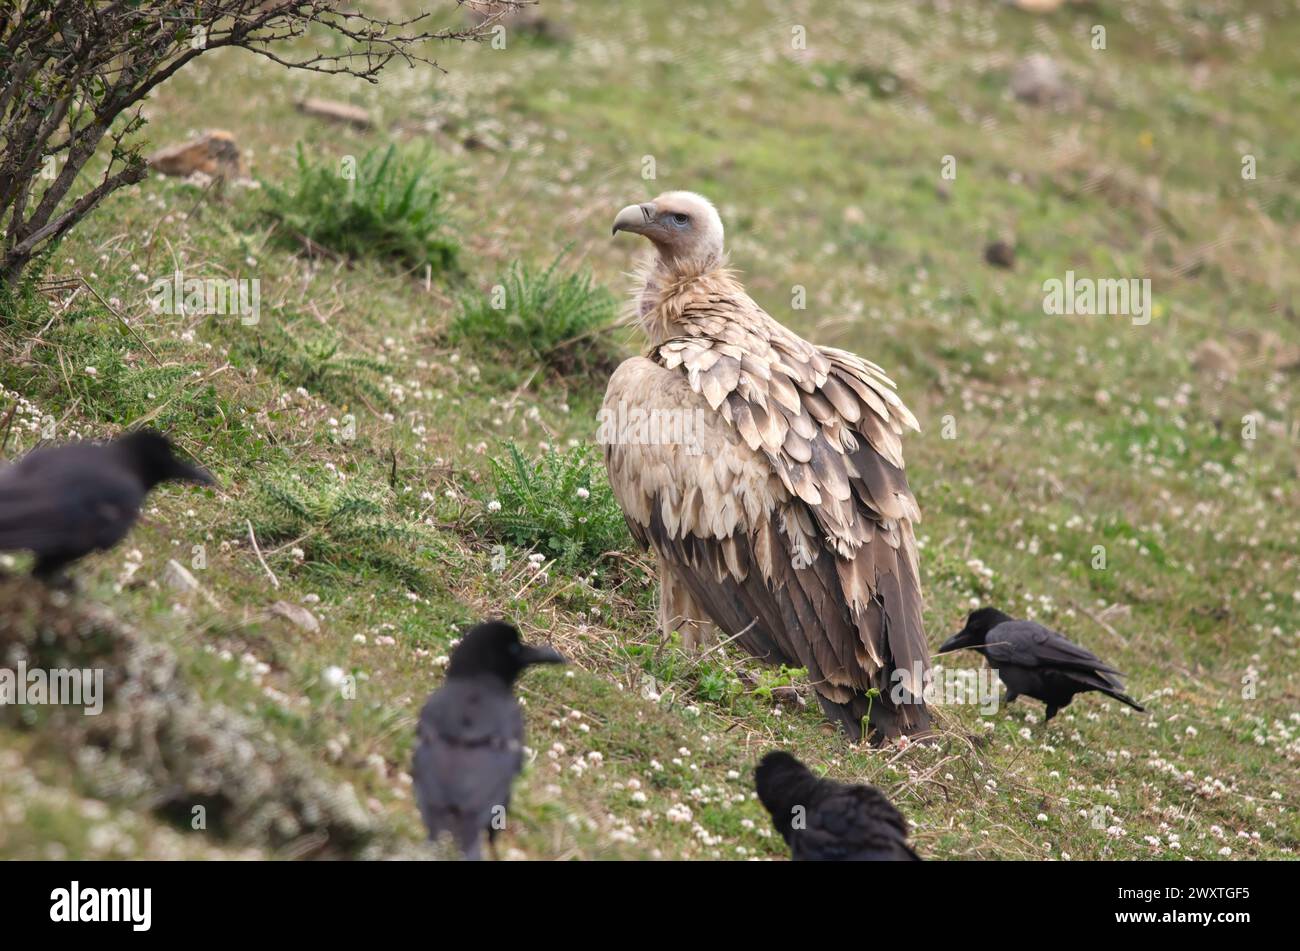 Himalayan vulture (Gyps himalayensis) and Large-billed crows (Corvus macrorhynchos) scavenging on a carcass at Auli in Uttarakhand, India Stock Photo